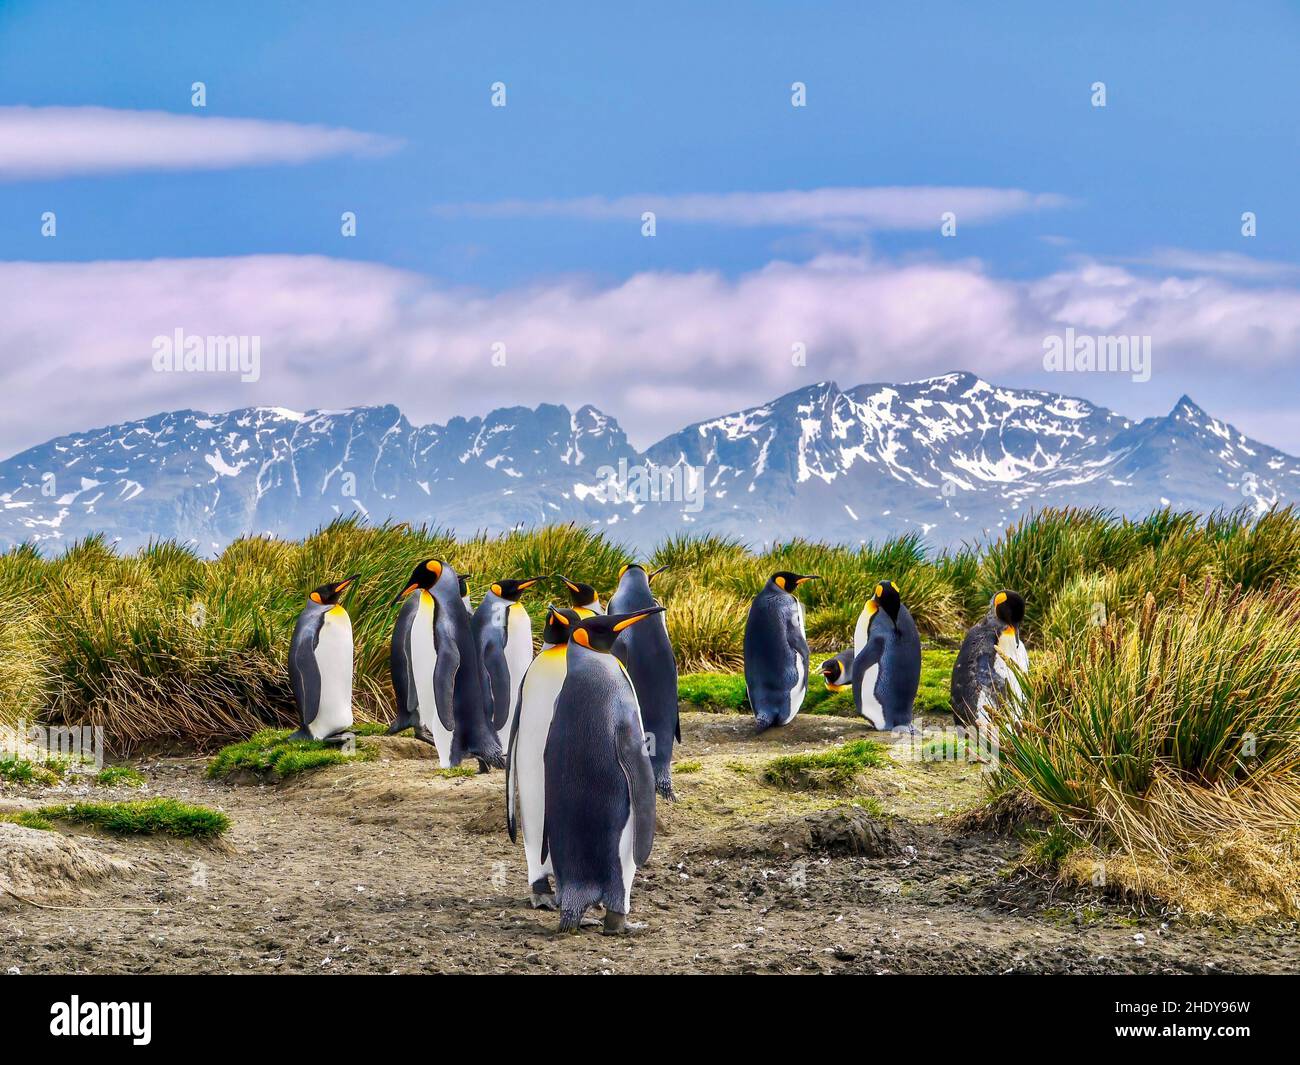 A group of king penguins, Aptenodytes patagonicus, standing together on South Georgia Island, surrounded by tussock grass, with mountains and a blue s Stock Photo